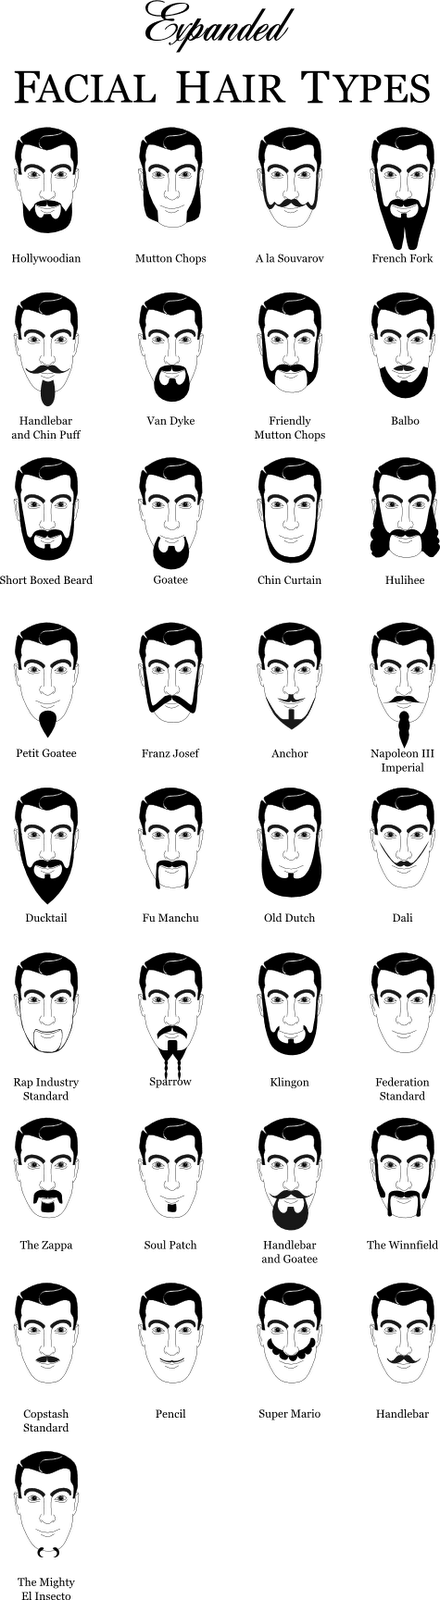 Admiral Cod: A Guide To Facial Hair Types